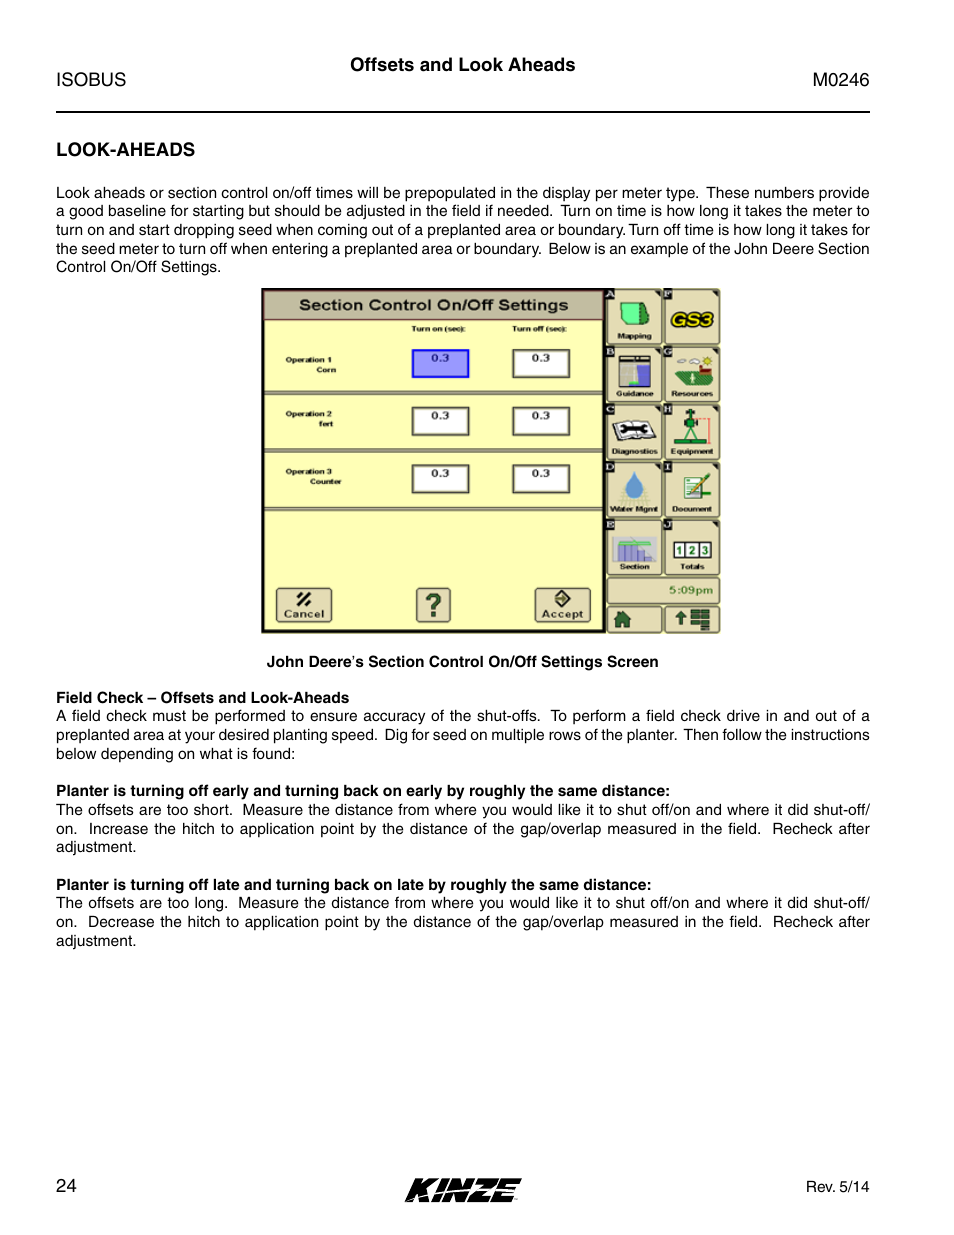 Look-aheads | Kinze ISOBUS Electronics Package (3000 Series) Rev. 5/14 User Manual | Page 30 / 46